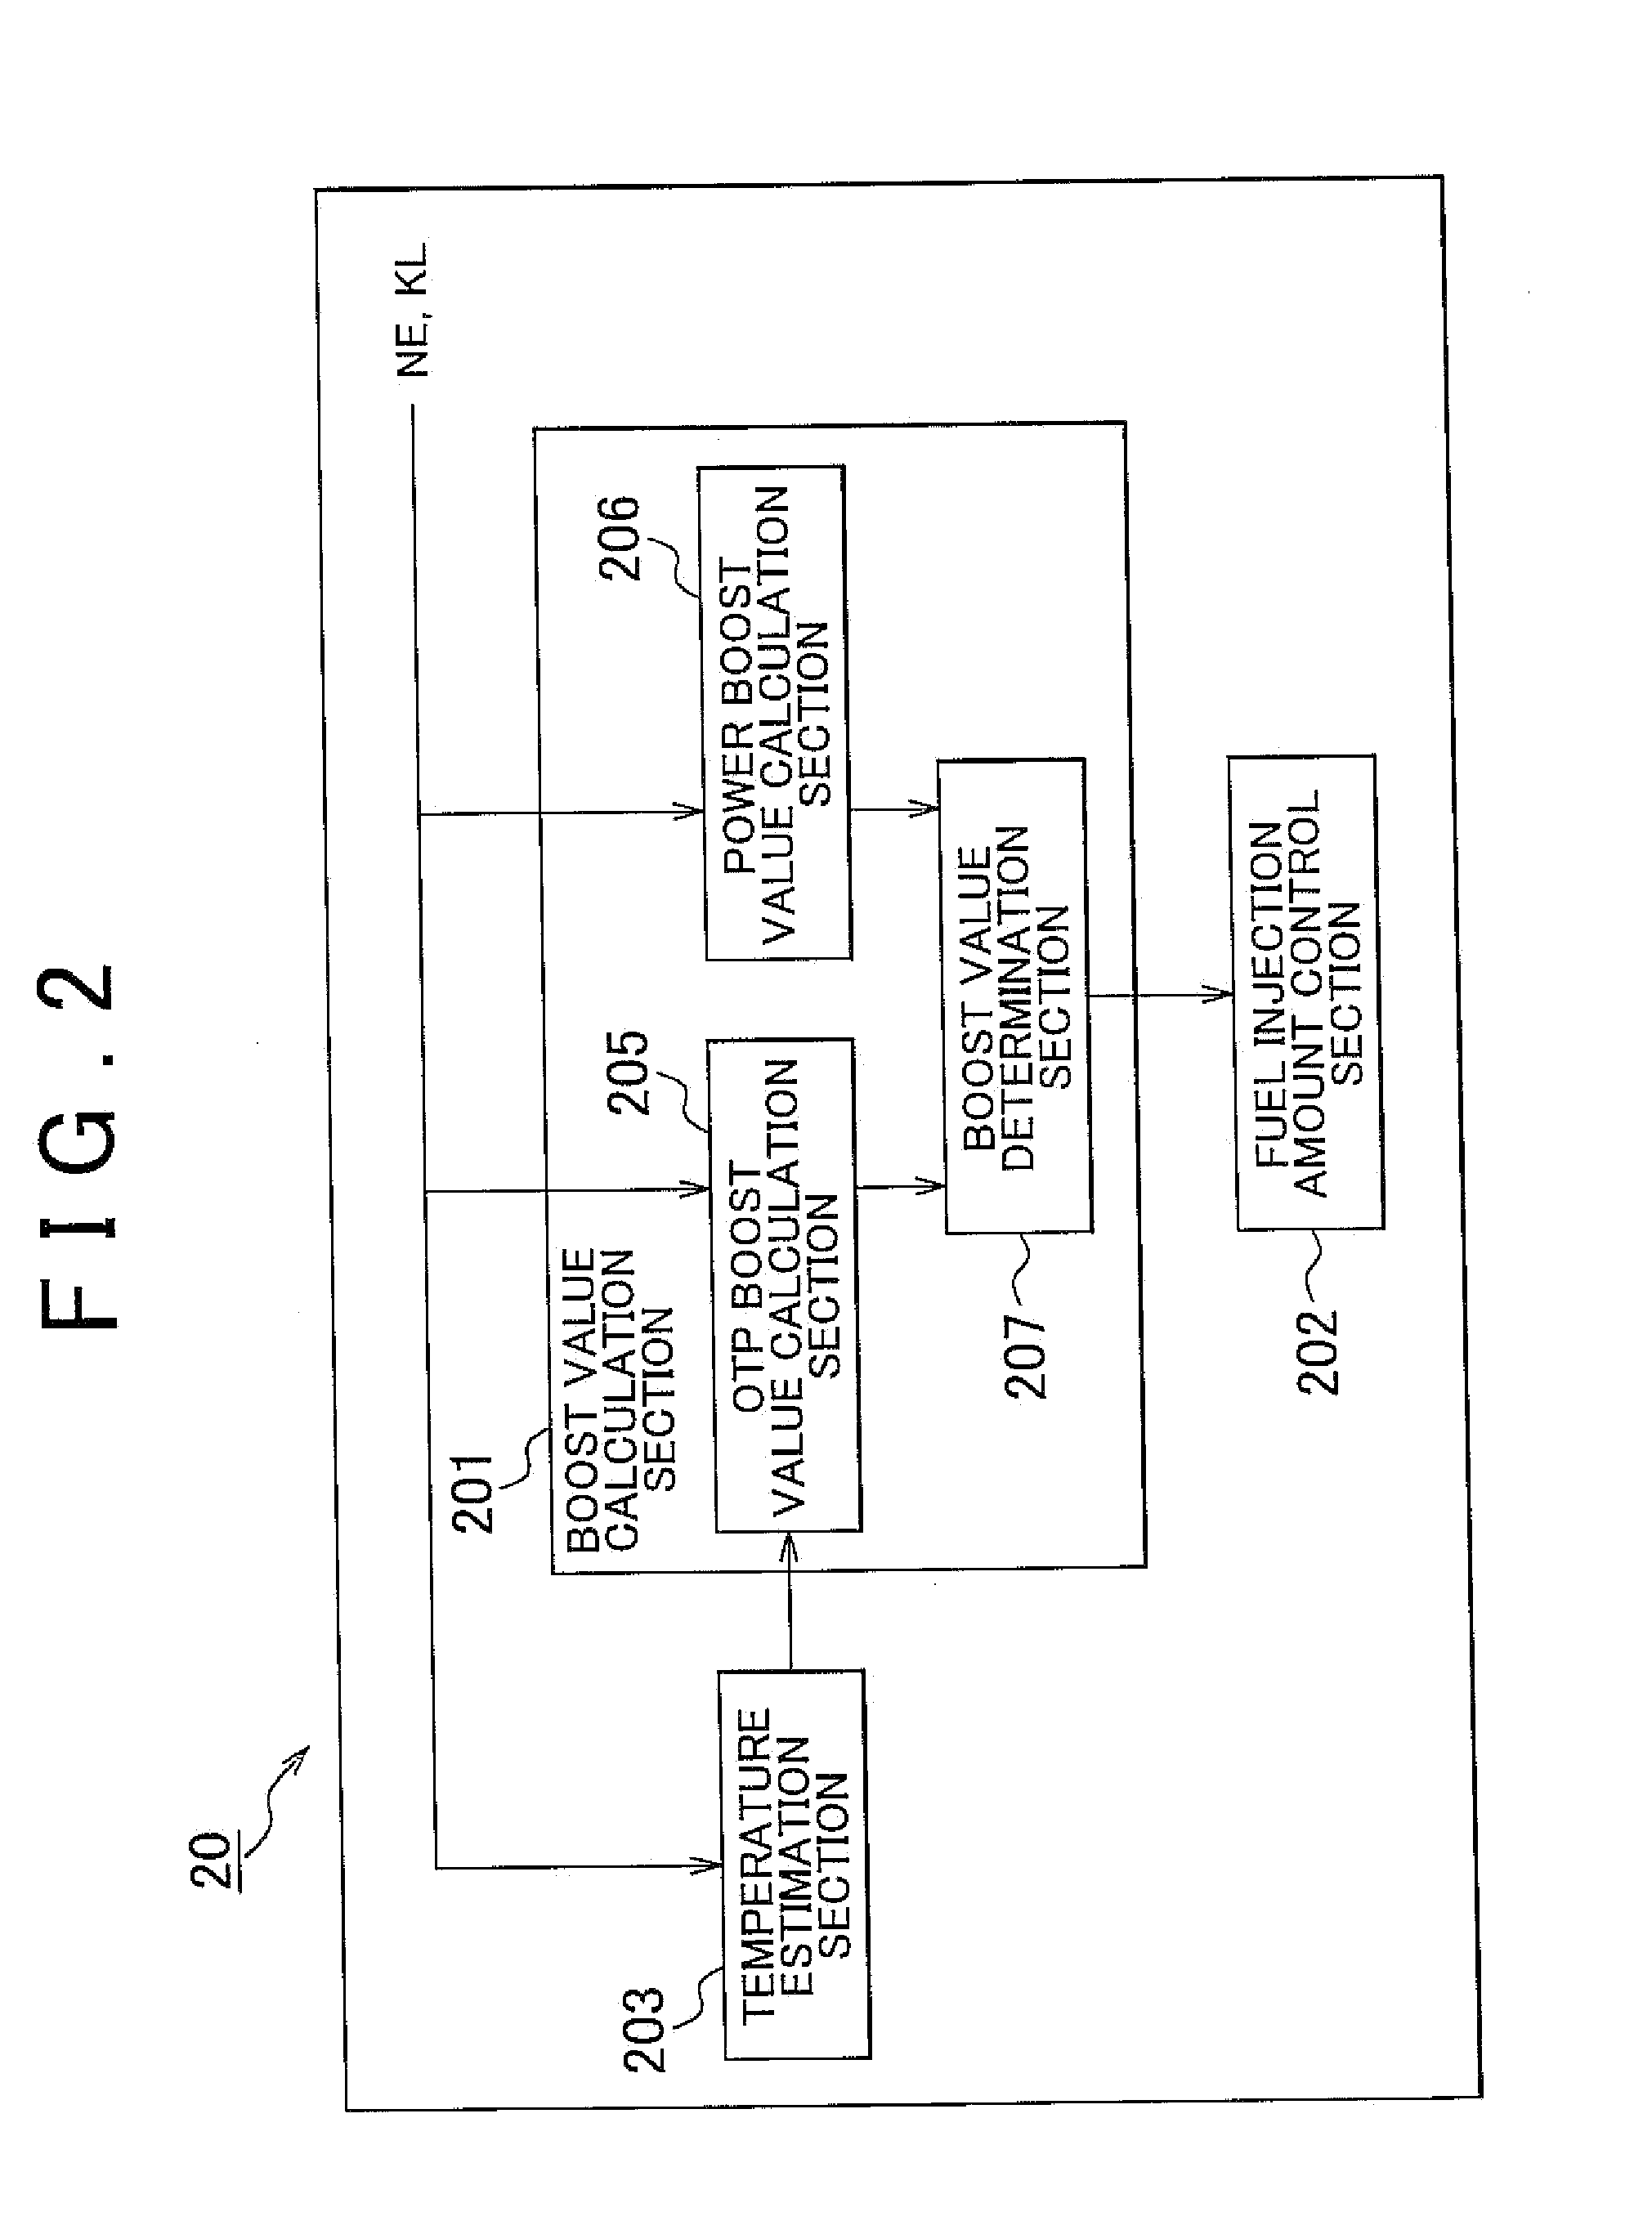 Fuel injection control apparatus for internal combustion engine and fuel injection control method for internal combustion engine